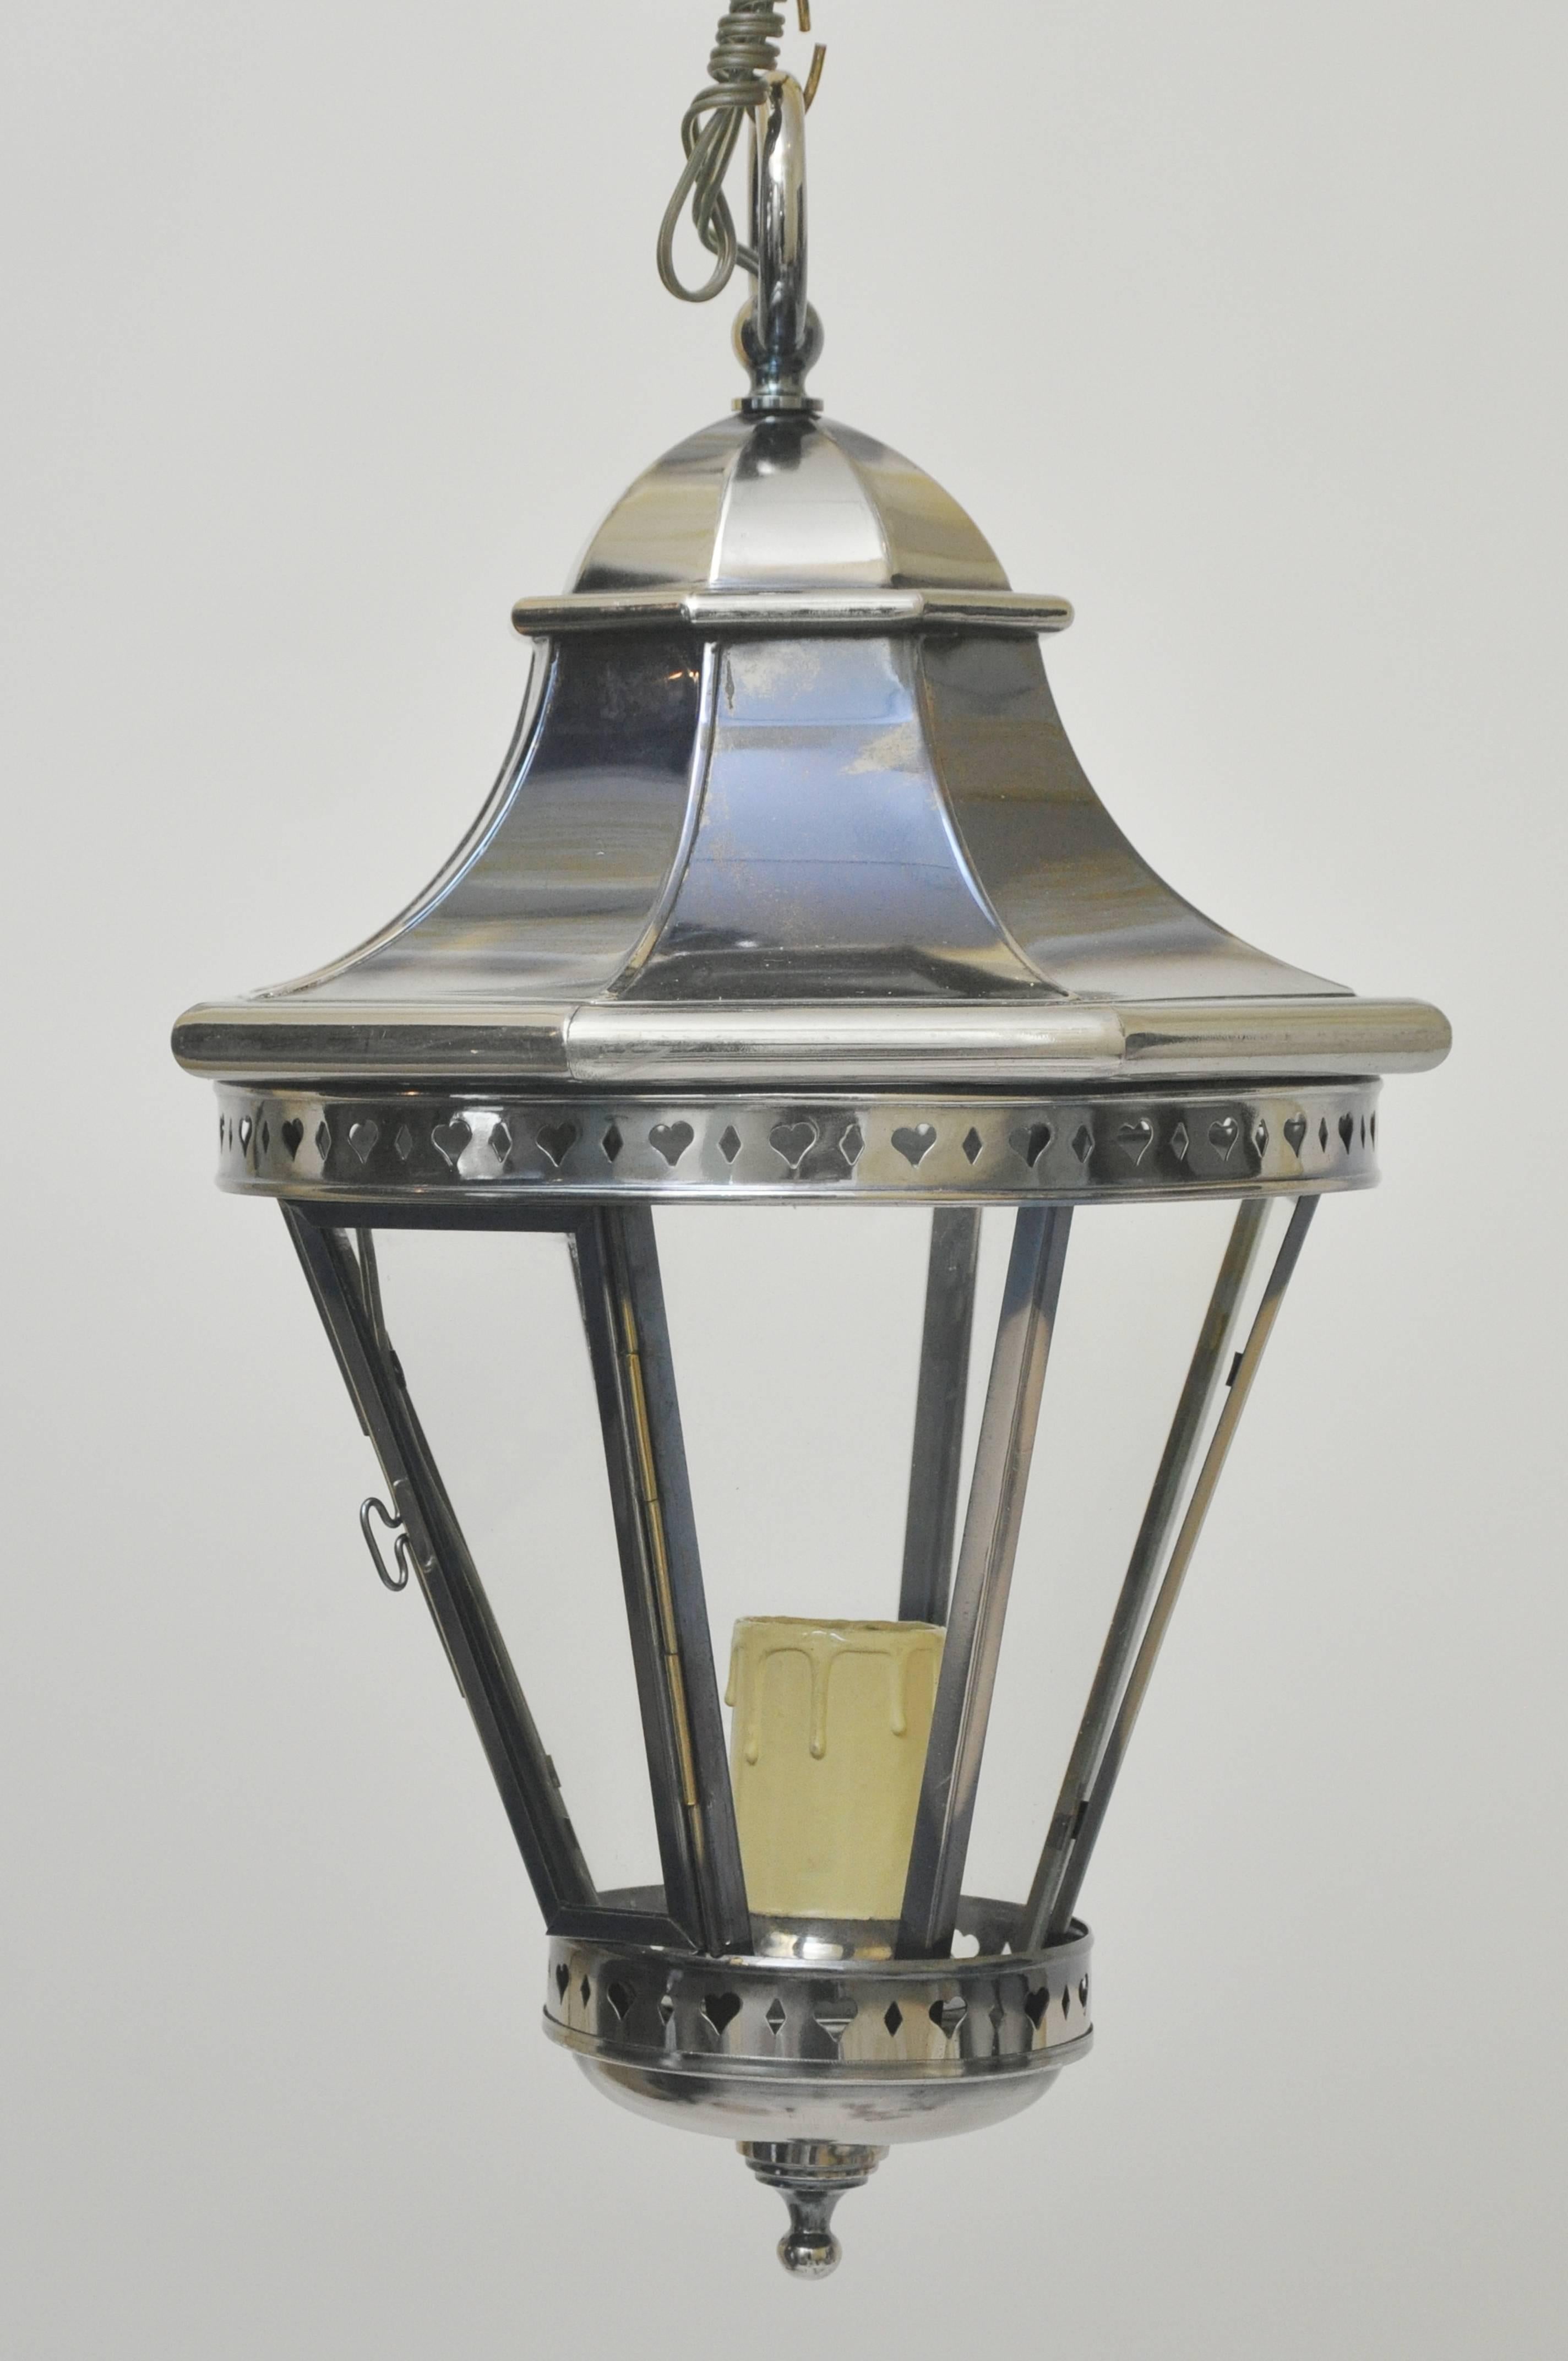 Vintage 1970s nickel lanterns from Spain. Never used. Octagonal shaped with one panel a hinged door to replace the bulb. Standard based light bulb required up to 75 watts. Beautifully made. Dimensions listed do not include 12 inches of chain and